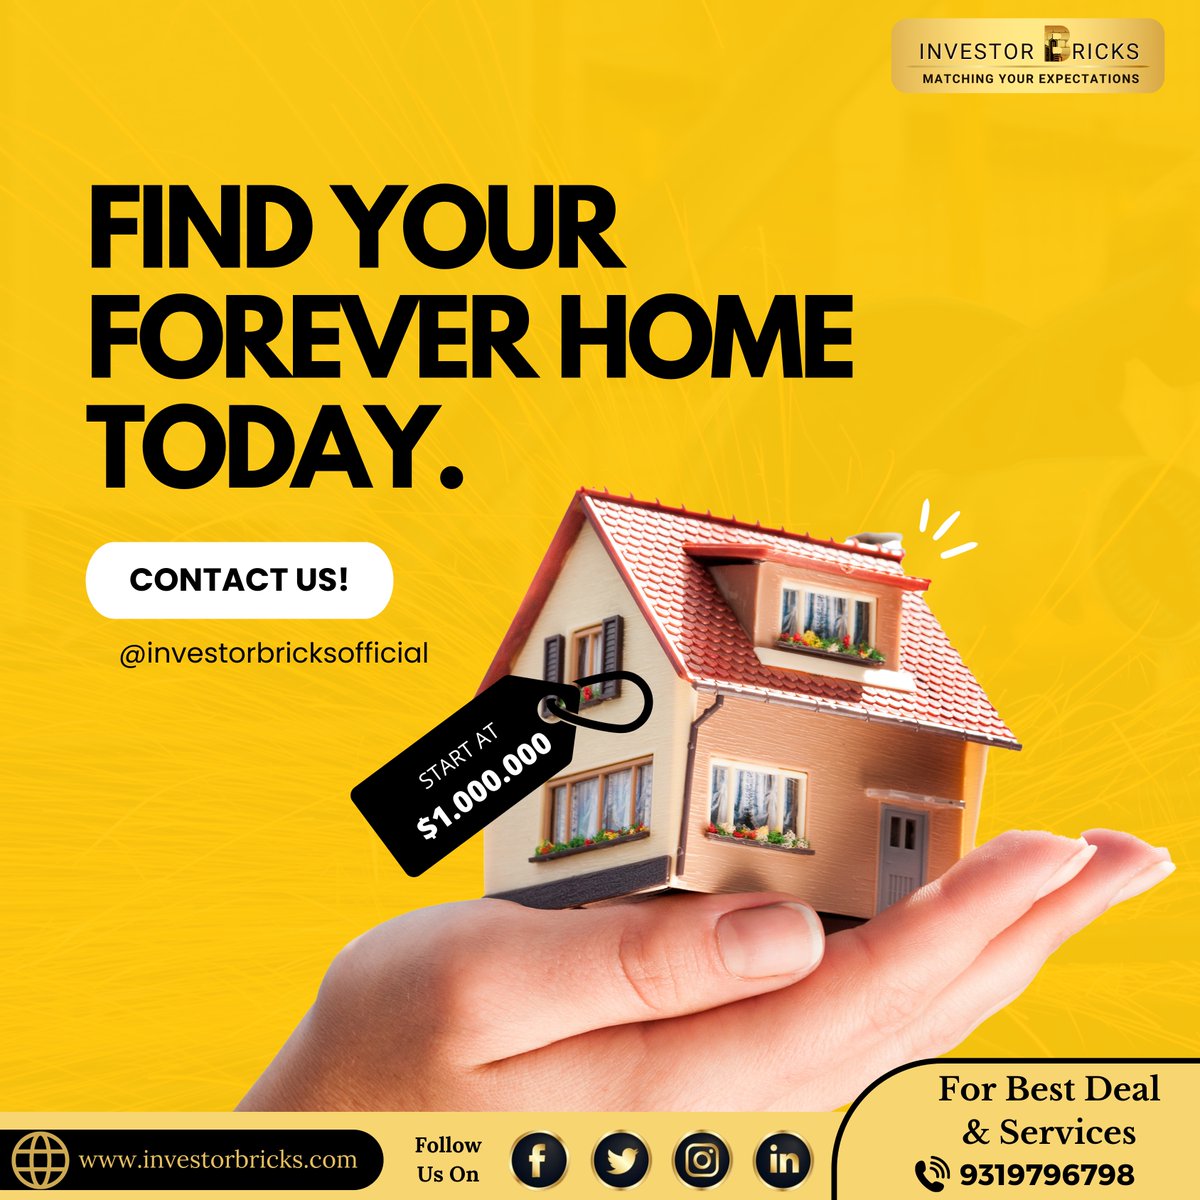 “Looking for your forever home? Take the first step towards finding your dream place today. Start your house hunt and make your real estate dreams come true! 🏡✨ #foreverhome #realestate #househunt”